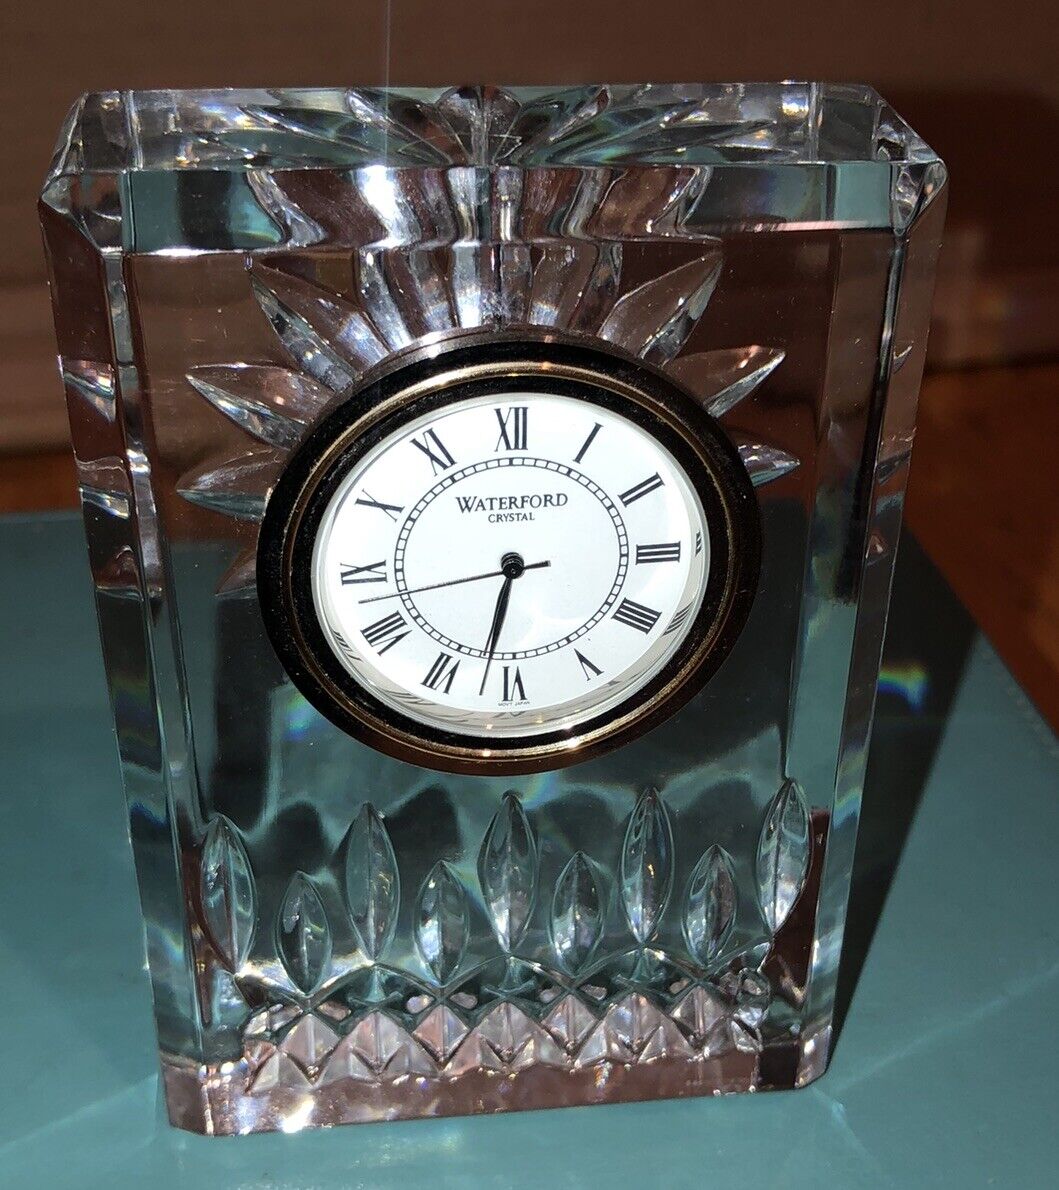 Vintage Waterford crystal clock 4 inches tall￼